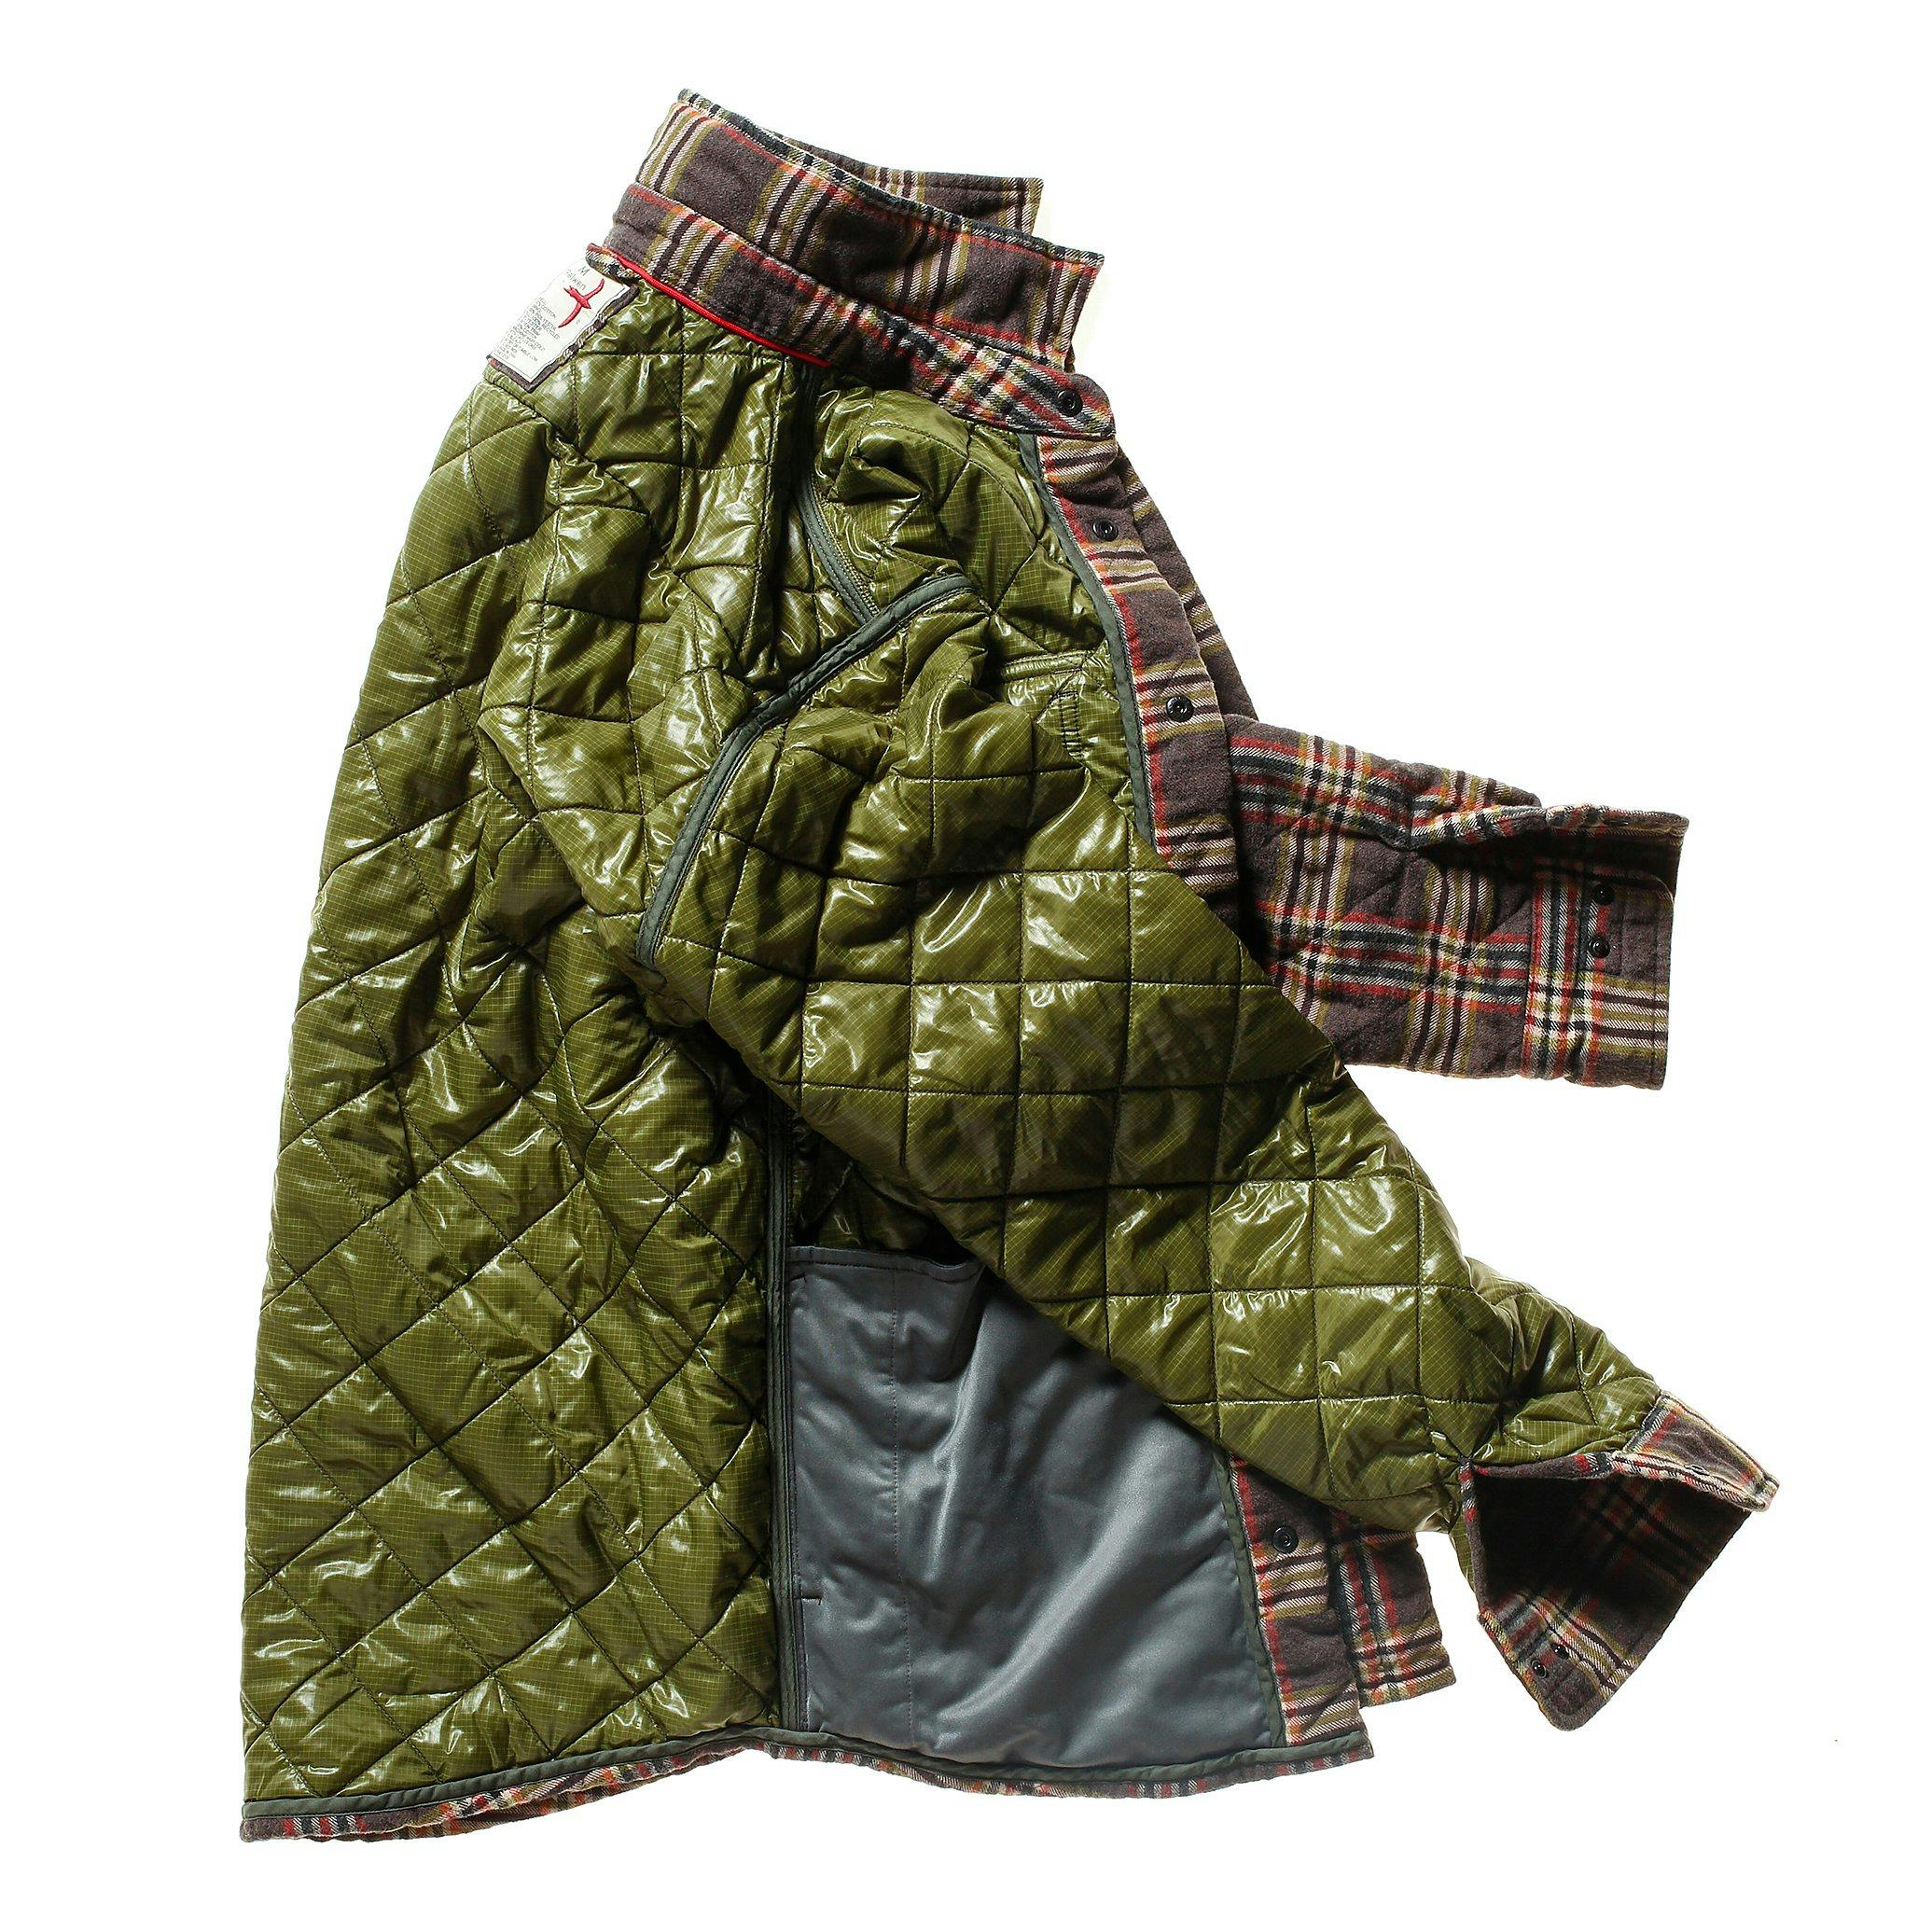 Relwen Quilted Flannel Shirt Jacket in Char / Brown